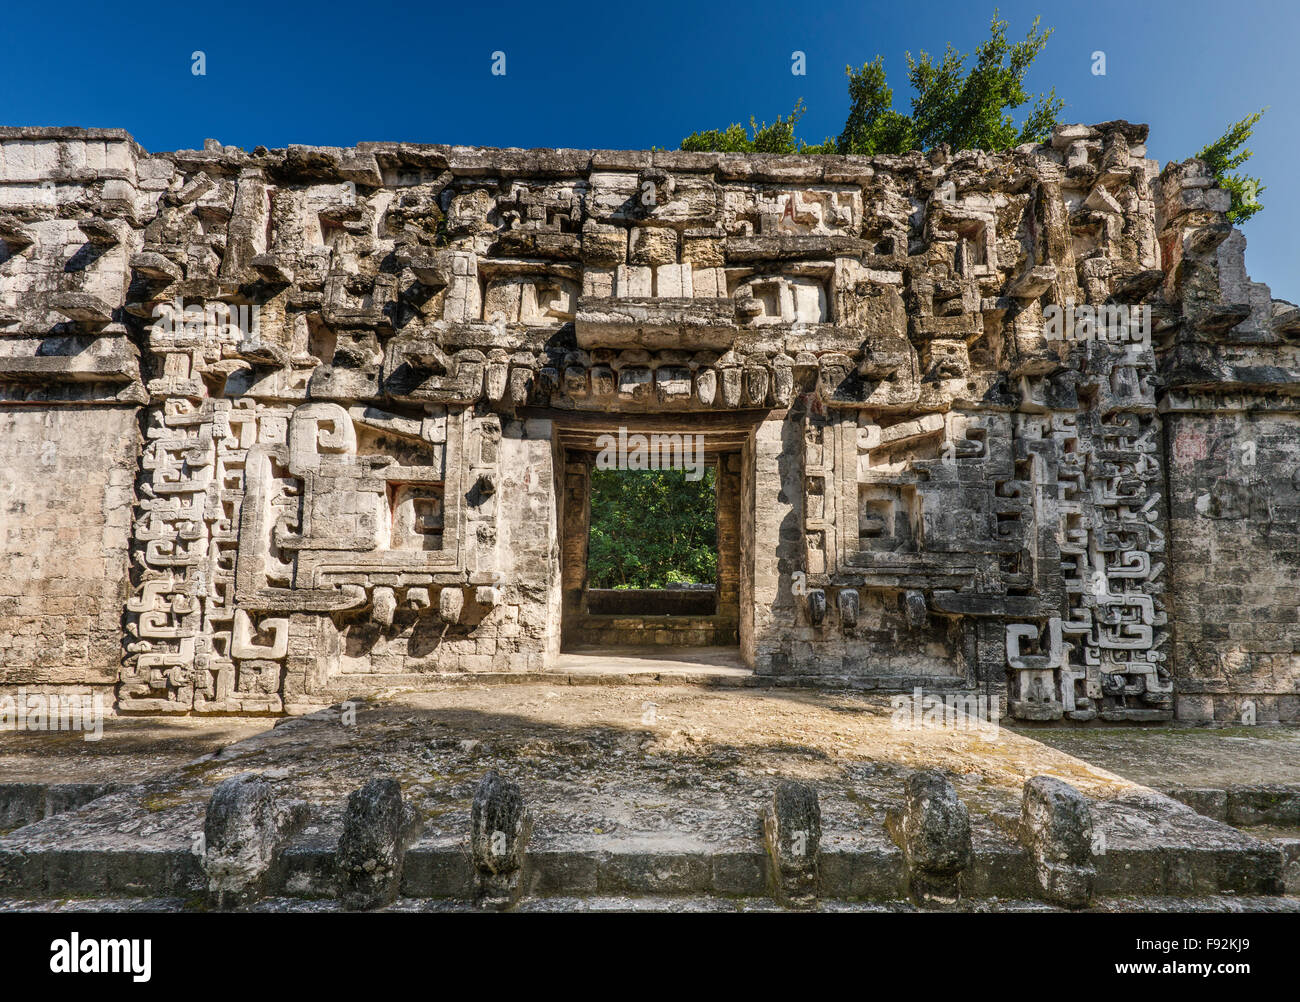 Monster-mouth doorway at House of the Serpent Mouth, Maya ruin at Chicanna archaeological site, La Ruta Rio Bec, Yucatan, Mexico Stock Photo